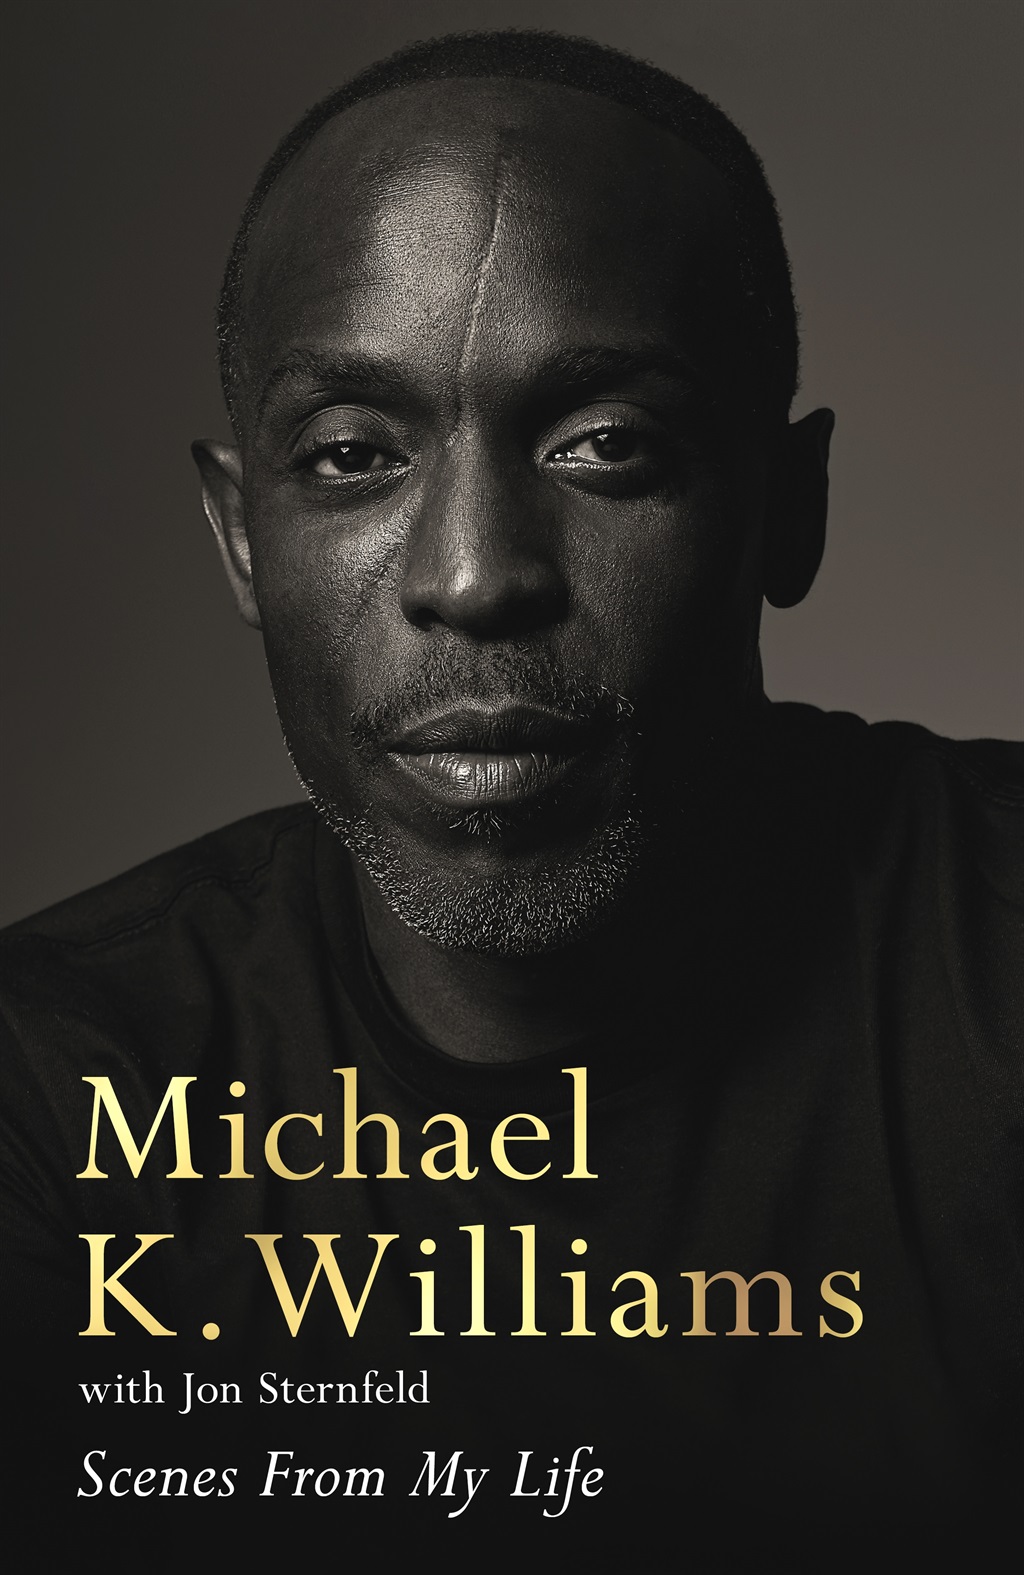 Scenes From My Life by Michael K. Williams and Jon Sternfield (Pan Macmillan)